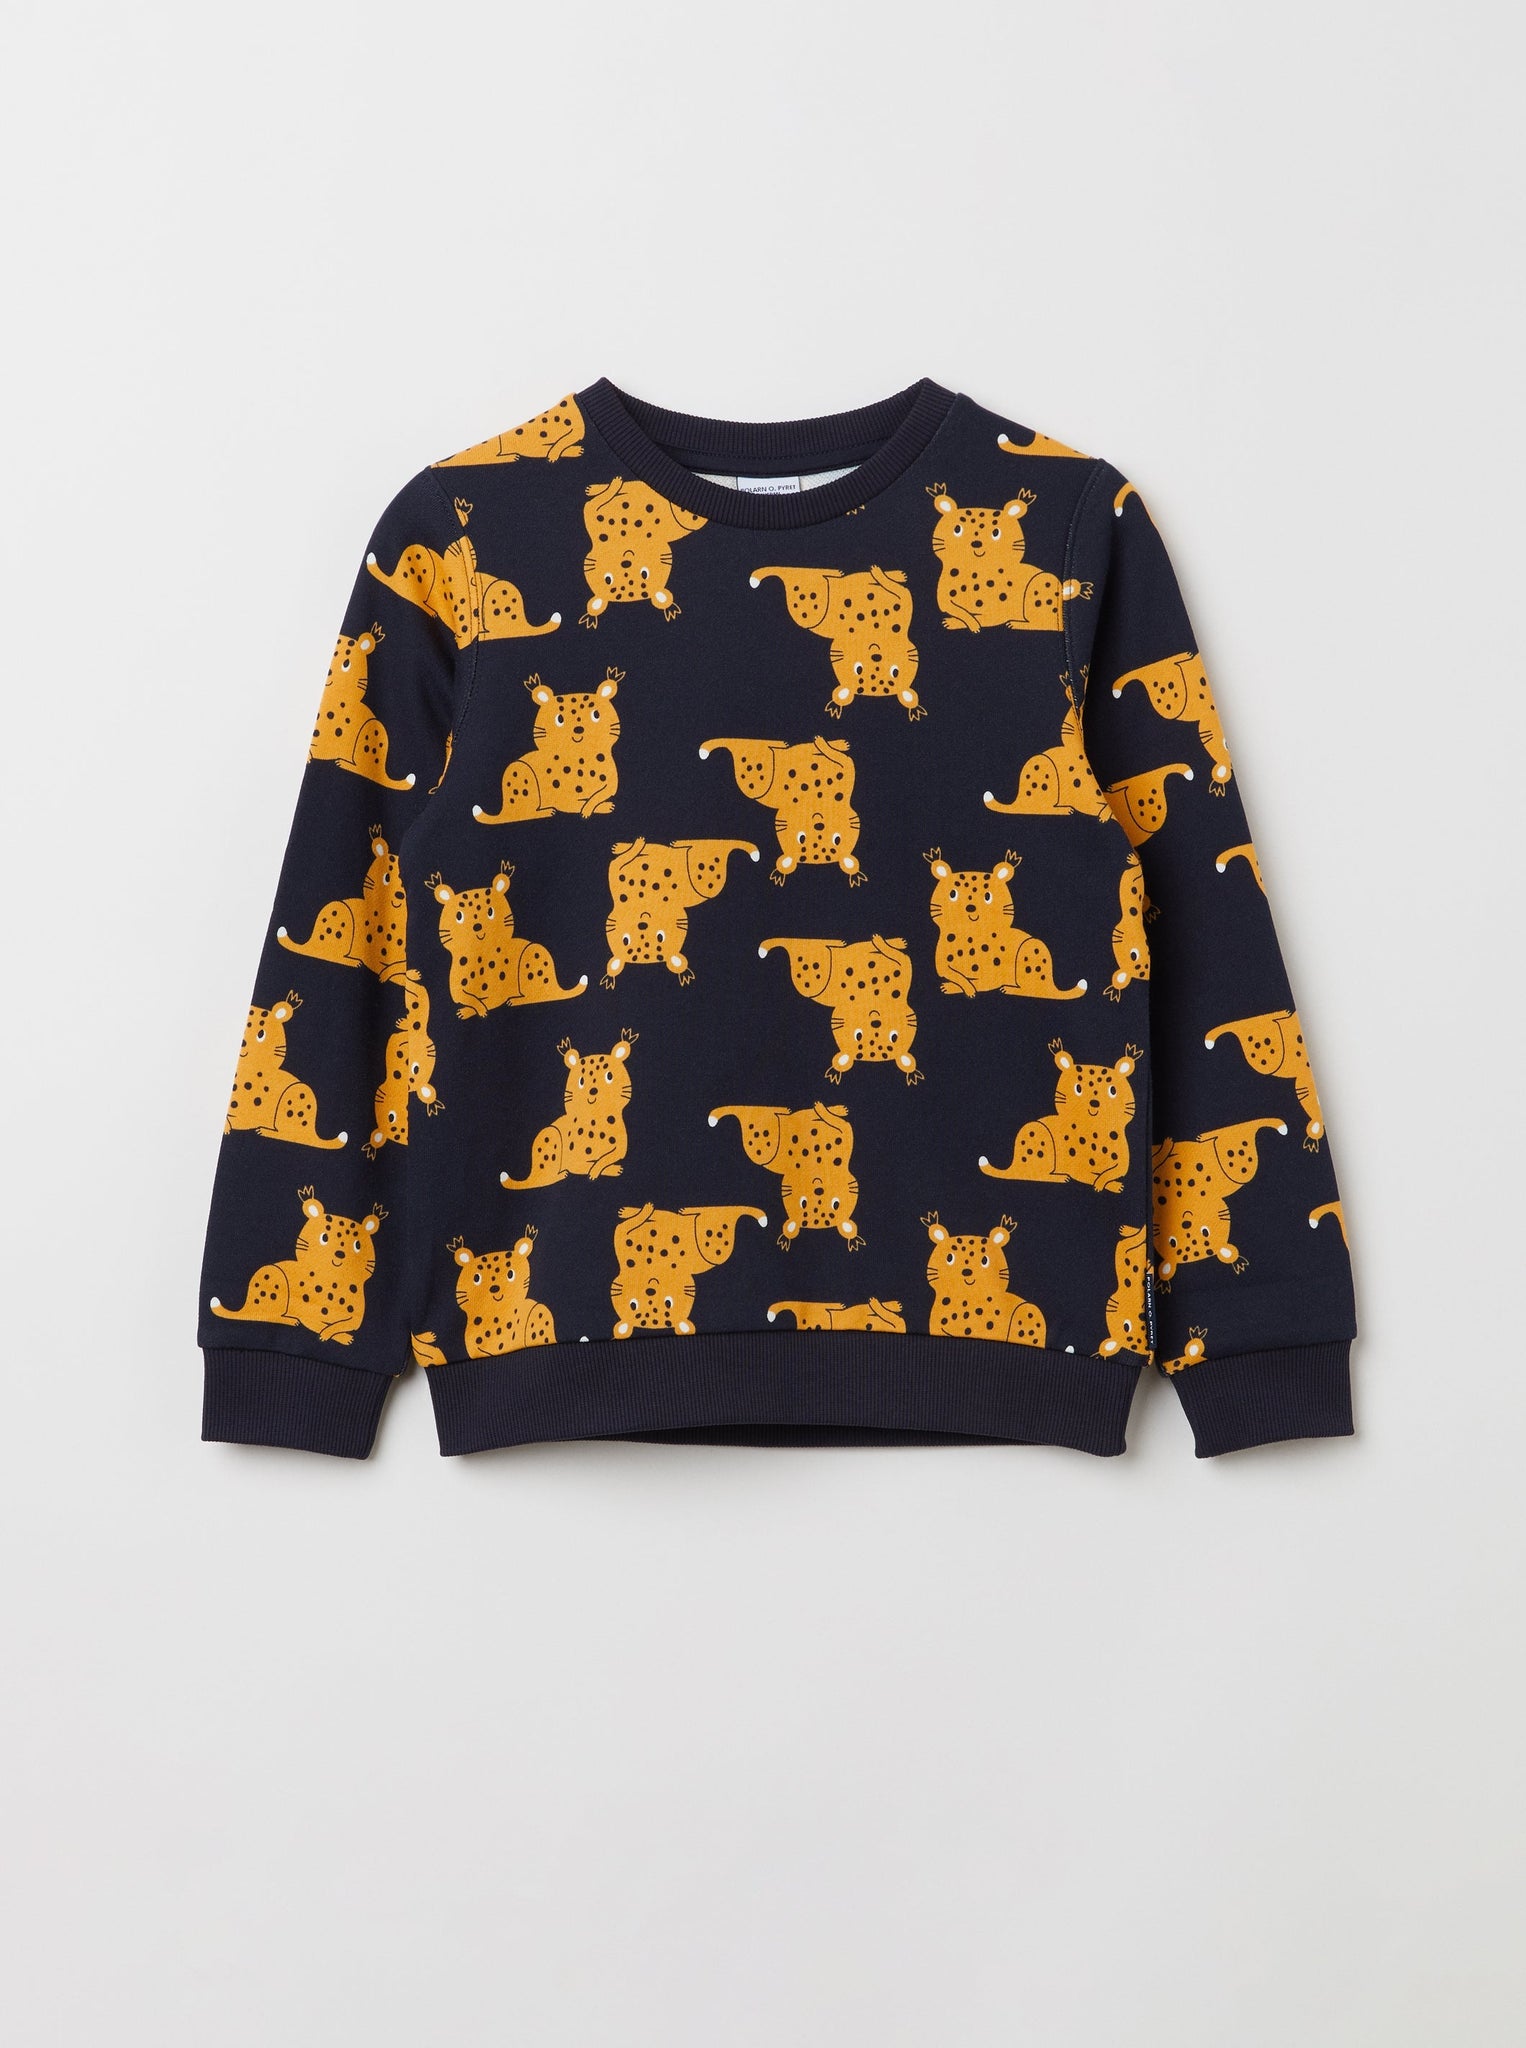 Lynx Print Navy Kids Sweatshirt from the Polarn O. Pyret kidswear collection. The best ethical kids clothes